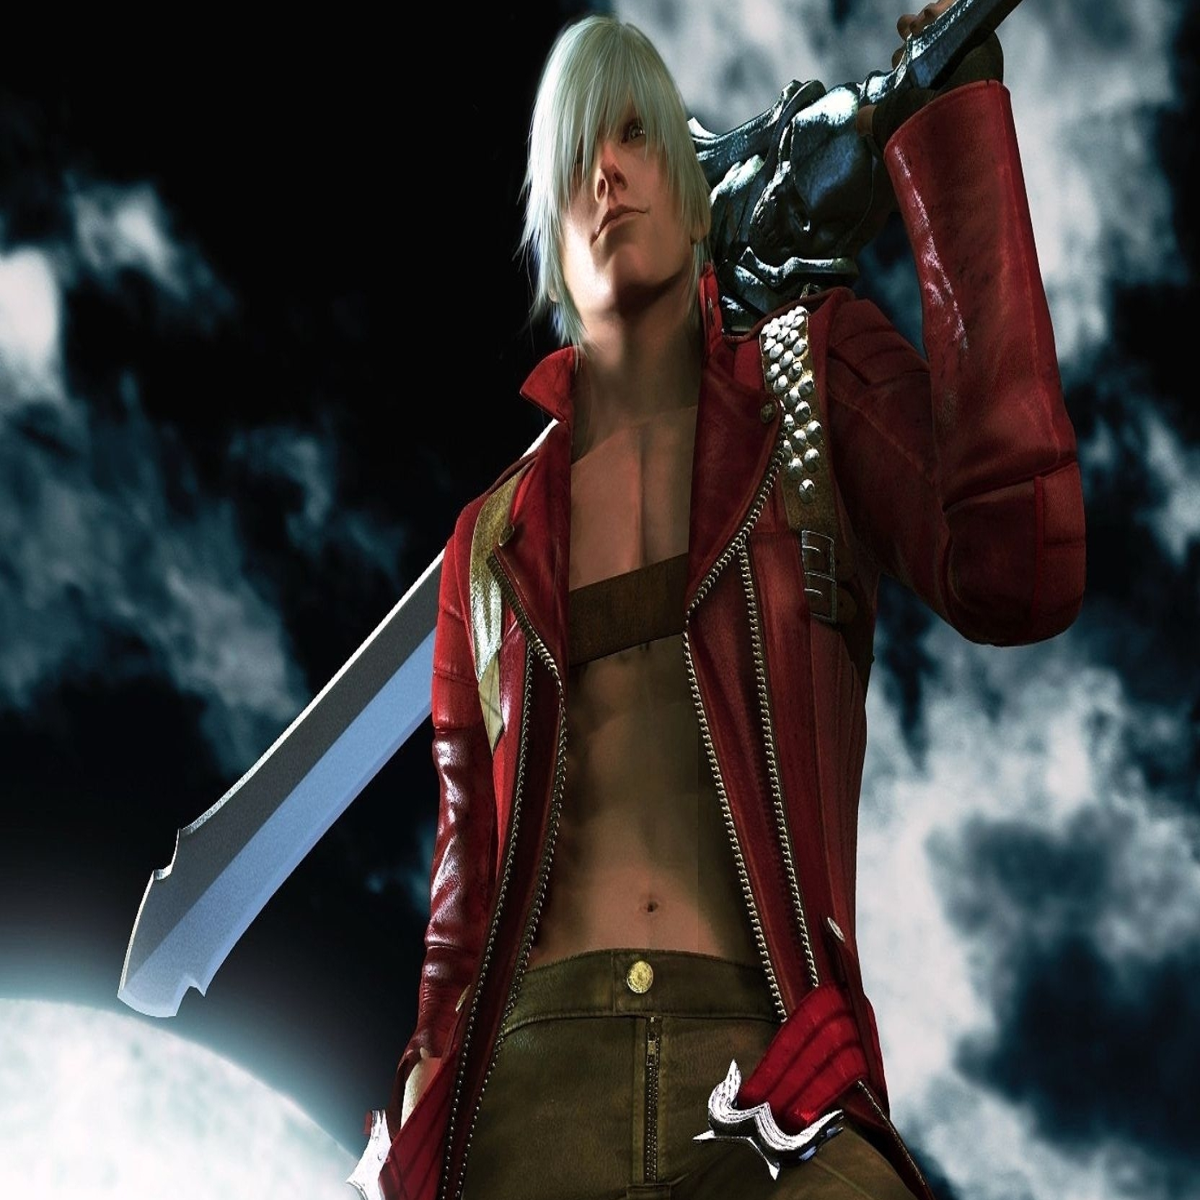 Devil May Cry 4 Special Edition - Dante Avatar PS4 — buy online